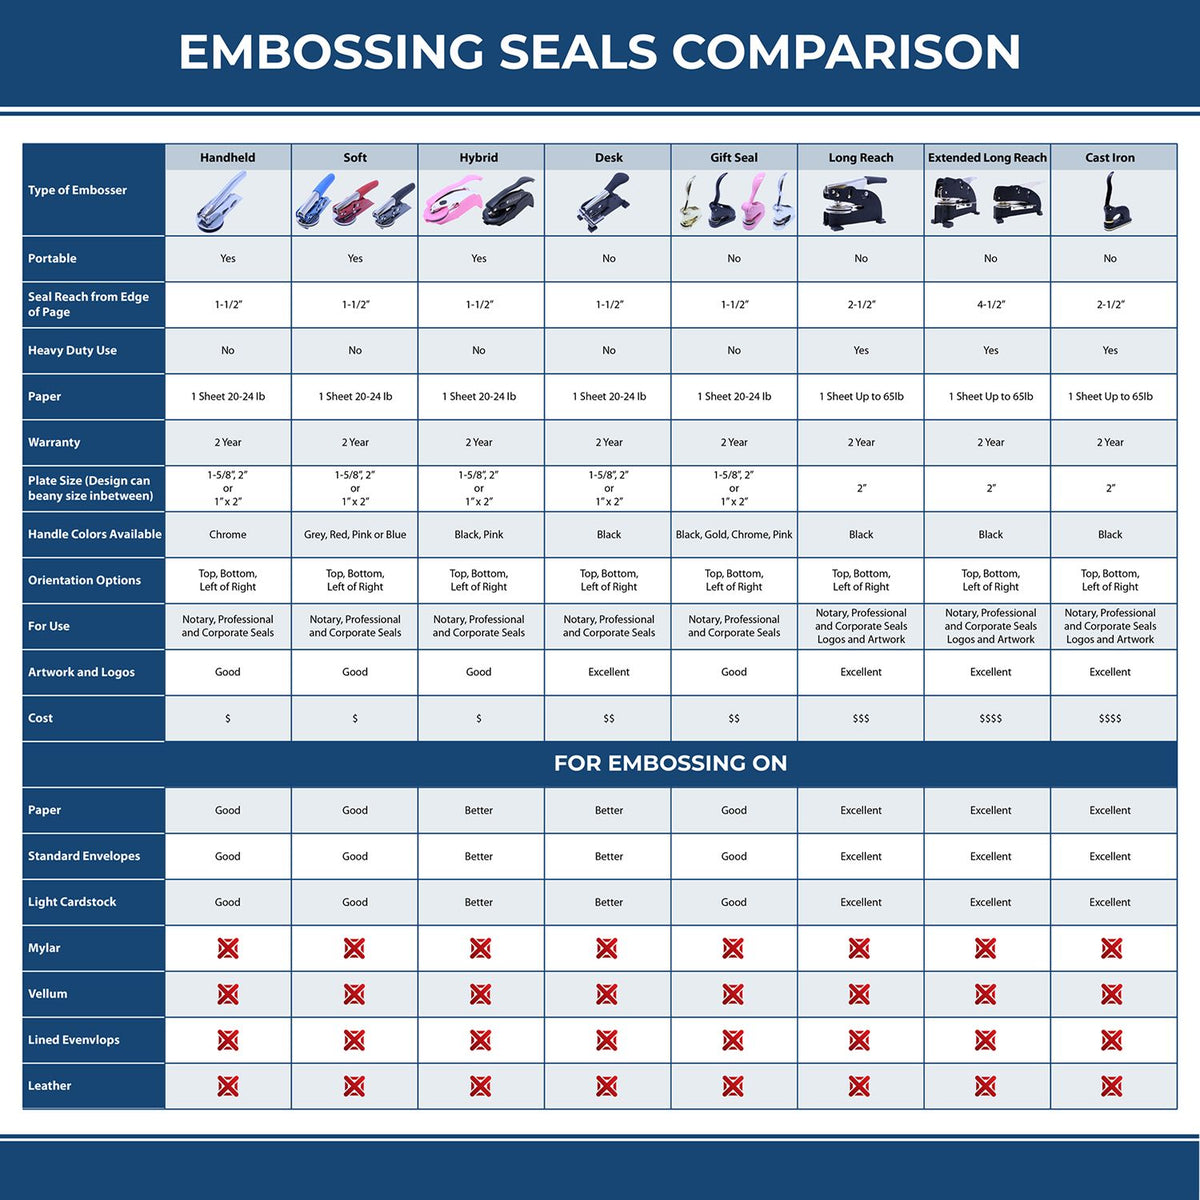 A comparison chart for the different types of mount models available for the State of Oklahoma Extended Long Reach Geologist Seal